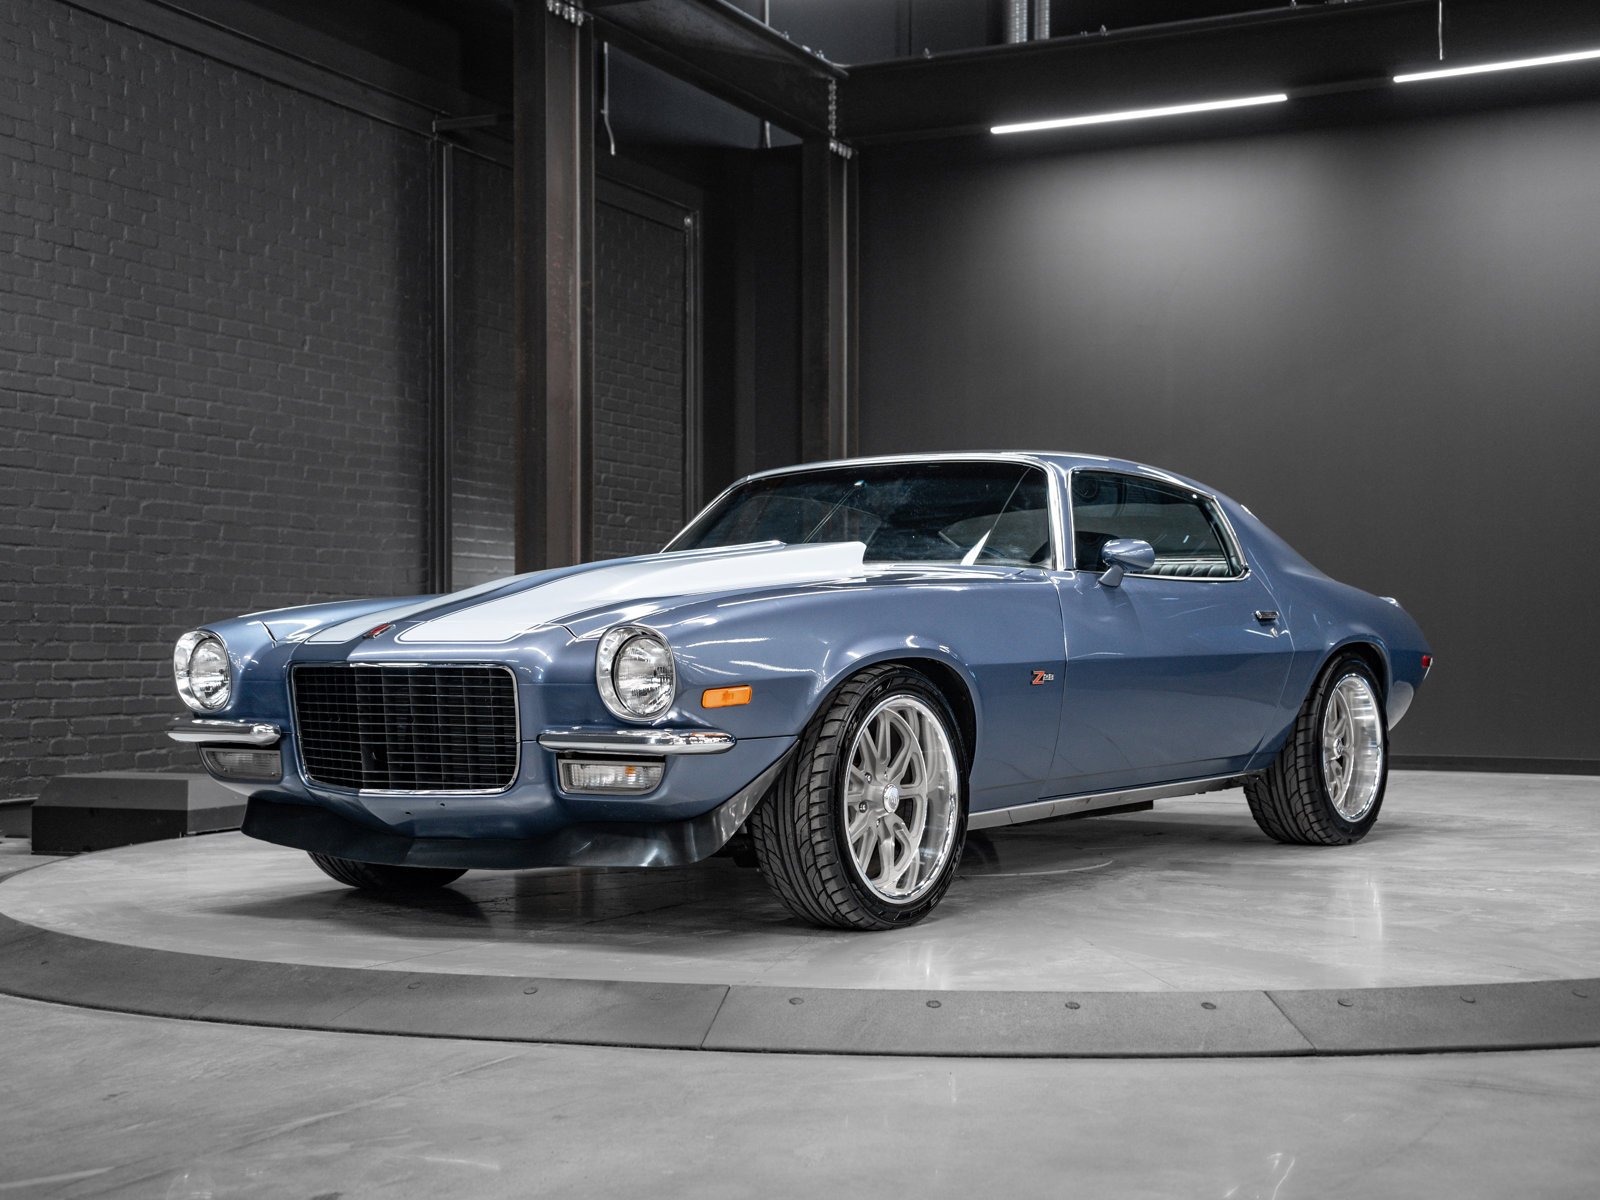 Used 1971 Blue Chevrolet | 502 Big Block | 4-Speed | Pro-Built | Tons of Upgrades image 9